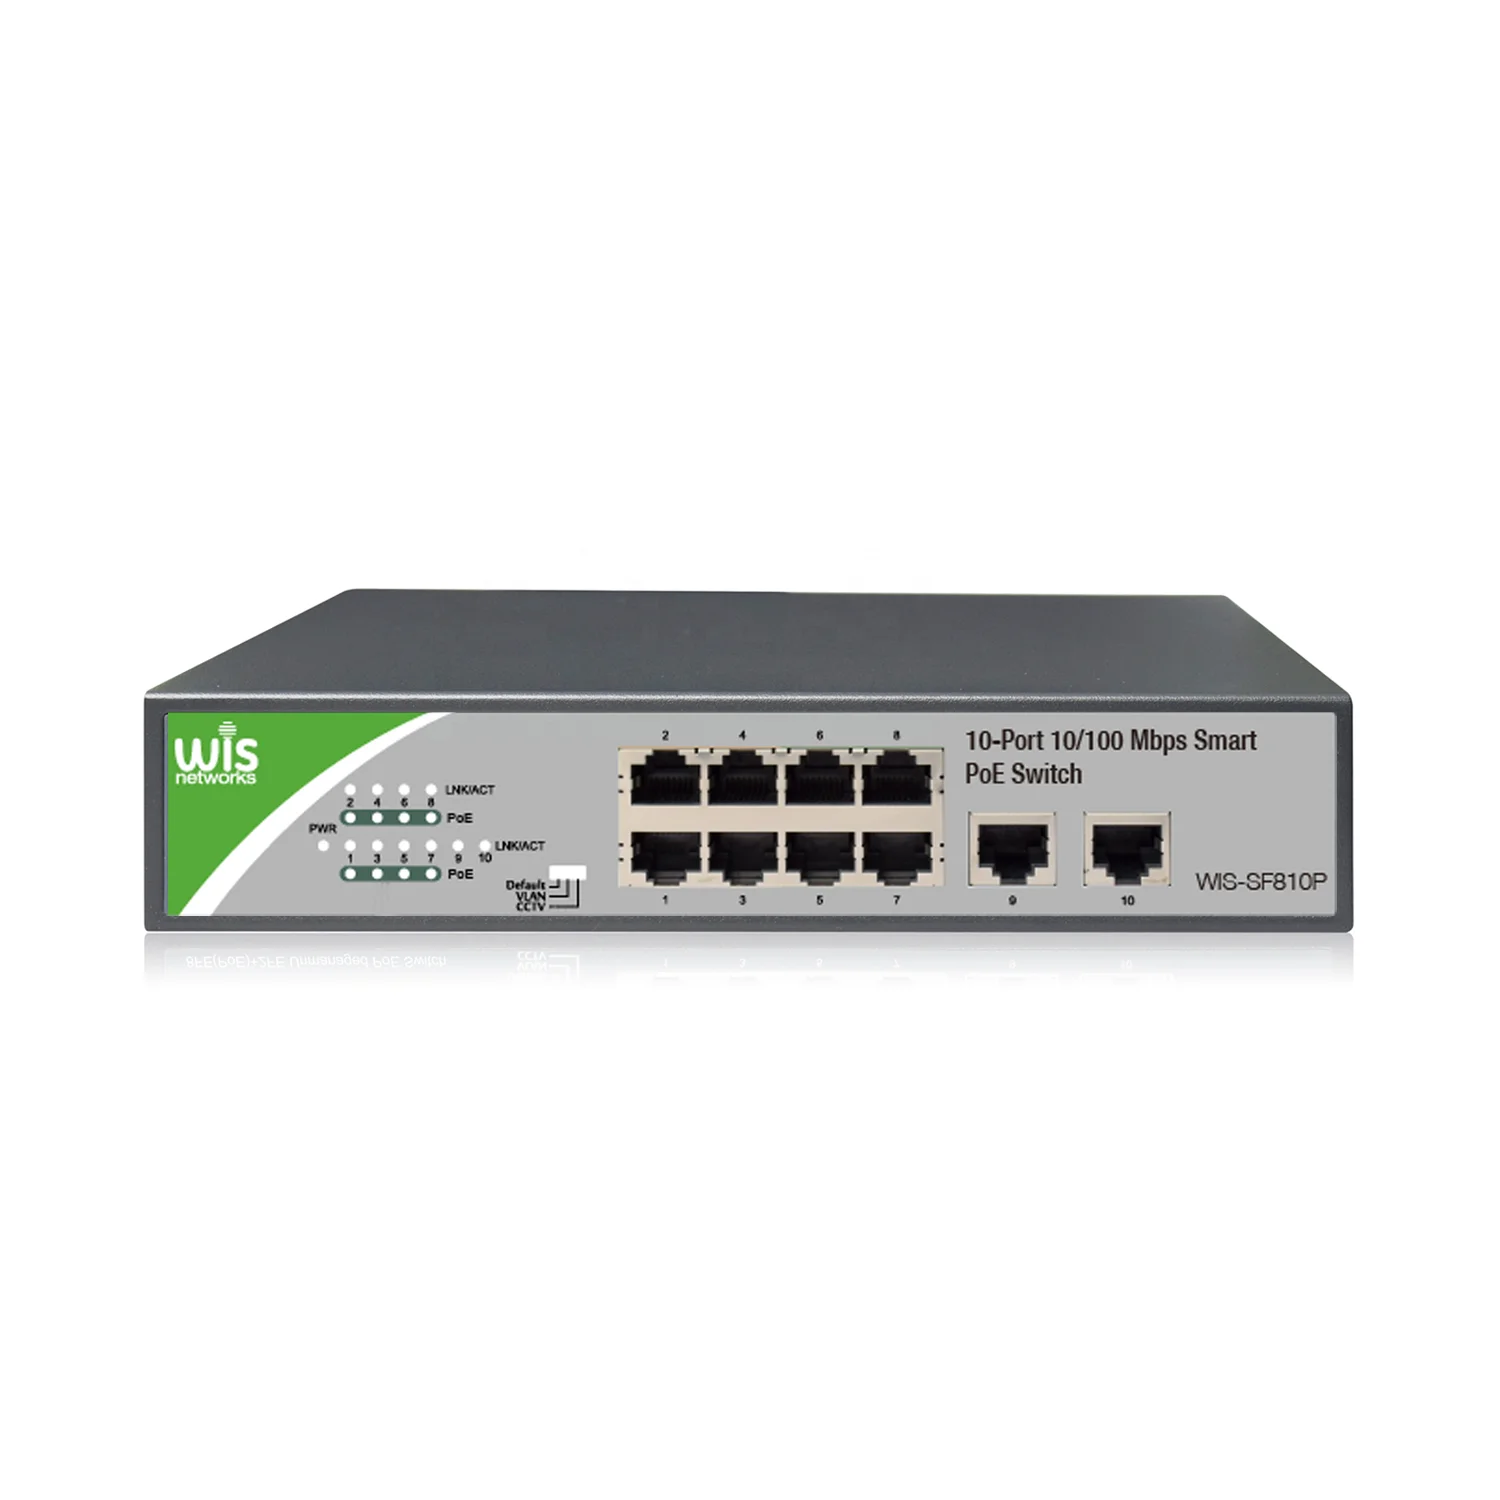 Smart switch led driver switching power supply 10-Port 48VDC 802.3at/802.3af PoE Unmanaged  Wifi switch enlarge